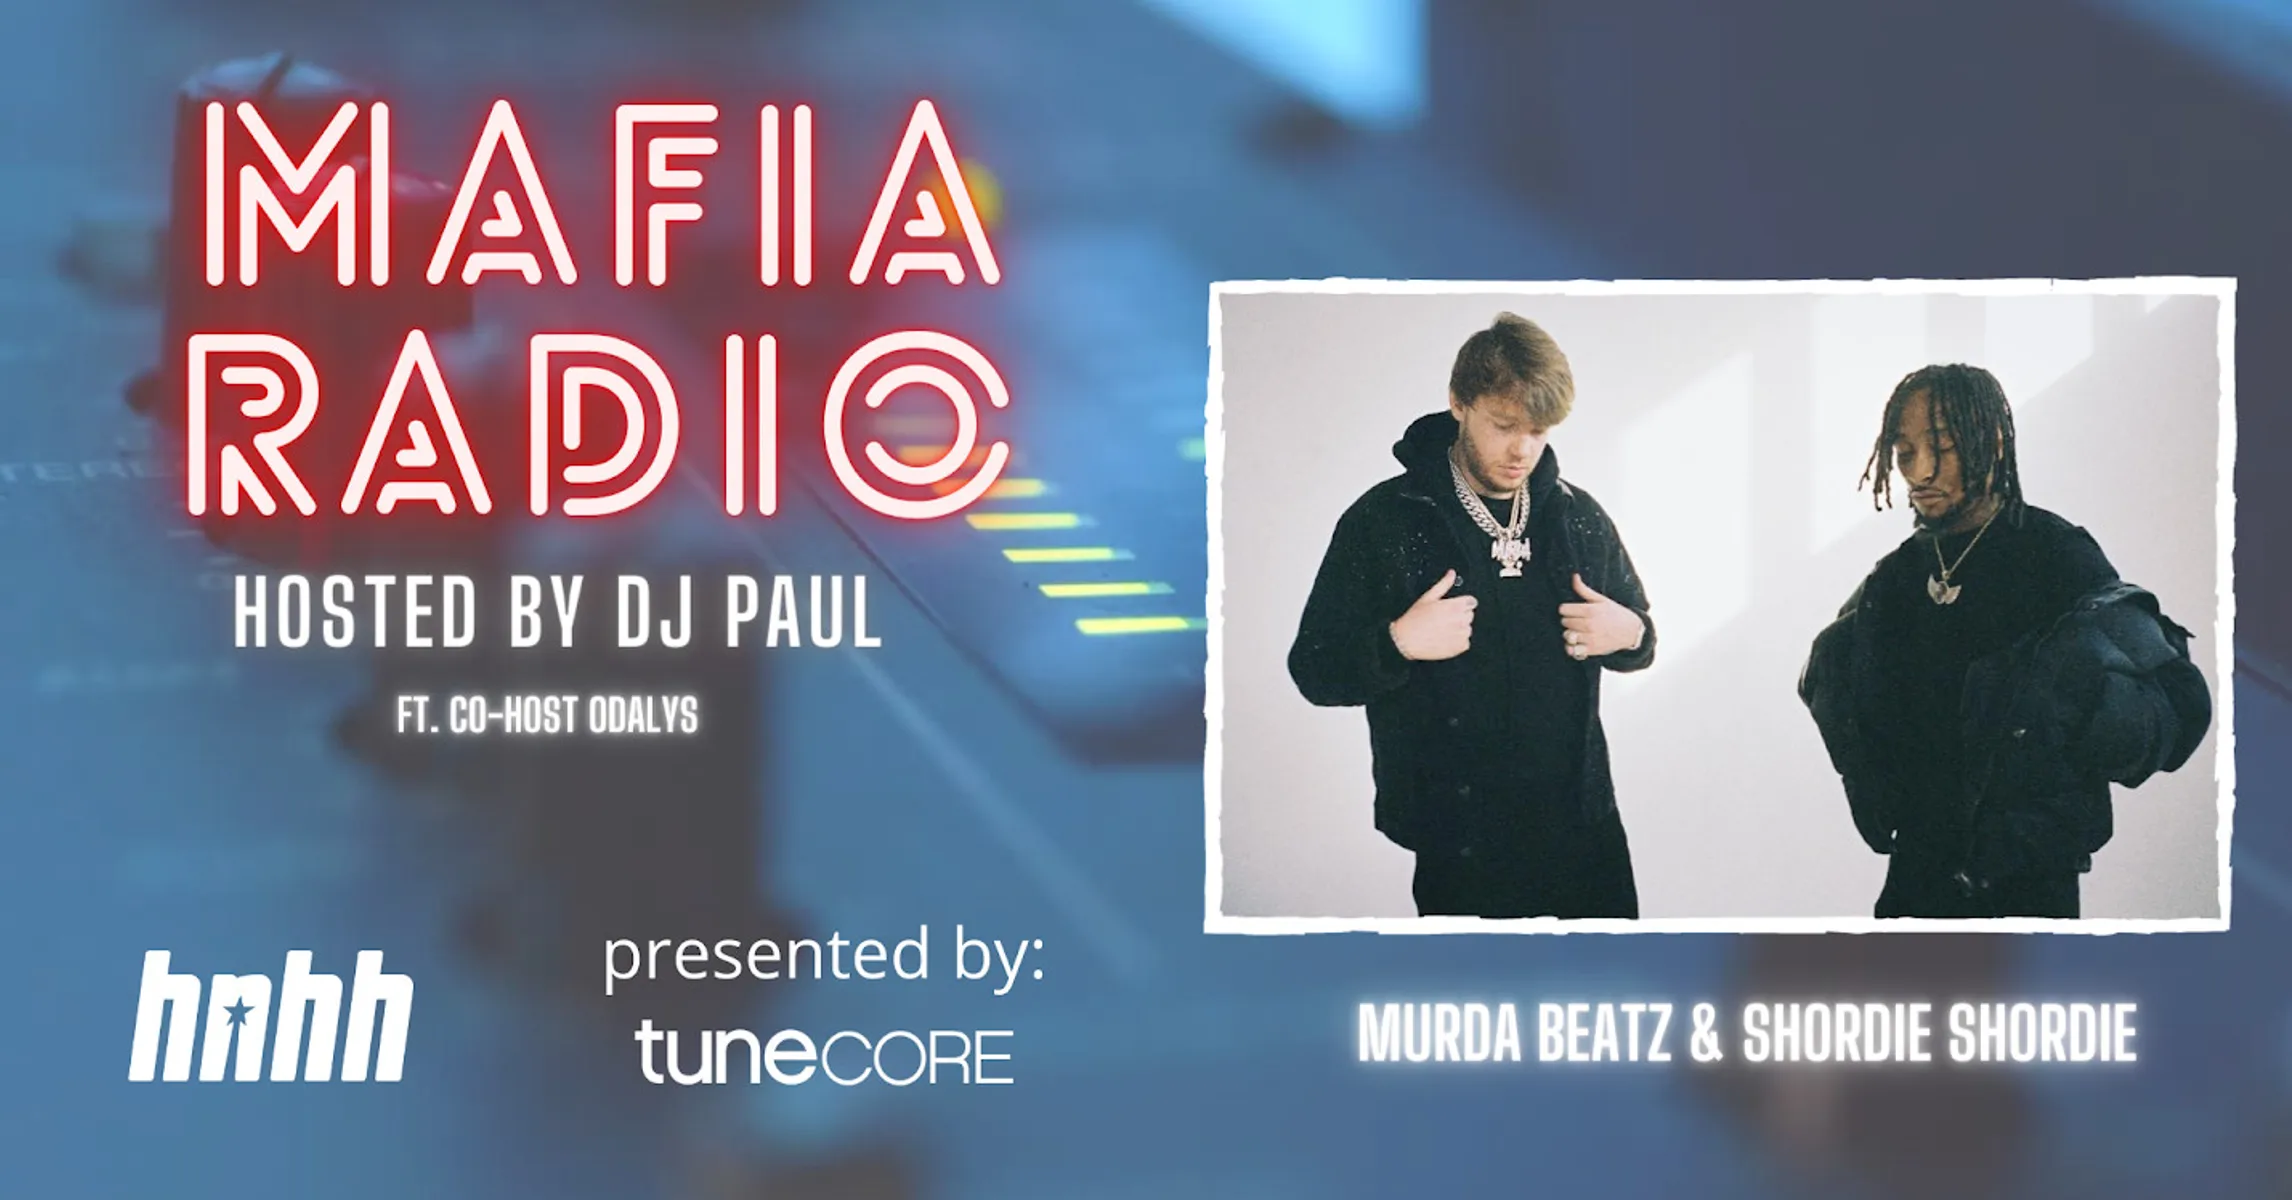 Mafia Radio Murda Beatz And Shordie Shordie Explain How They Connected And Made An Album 6953